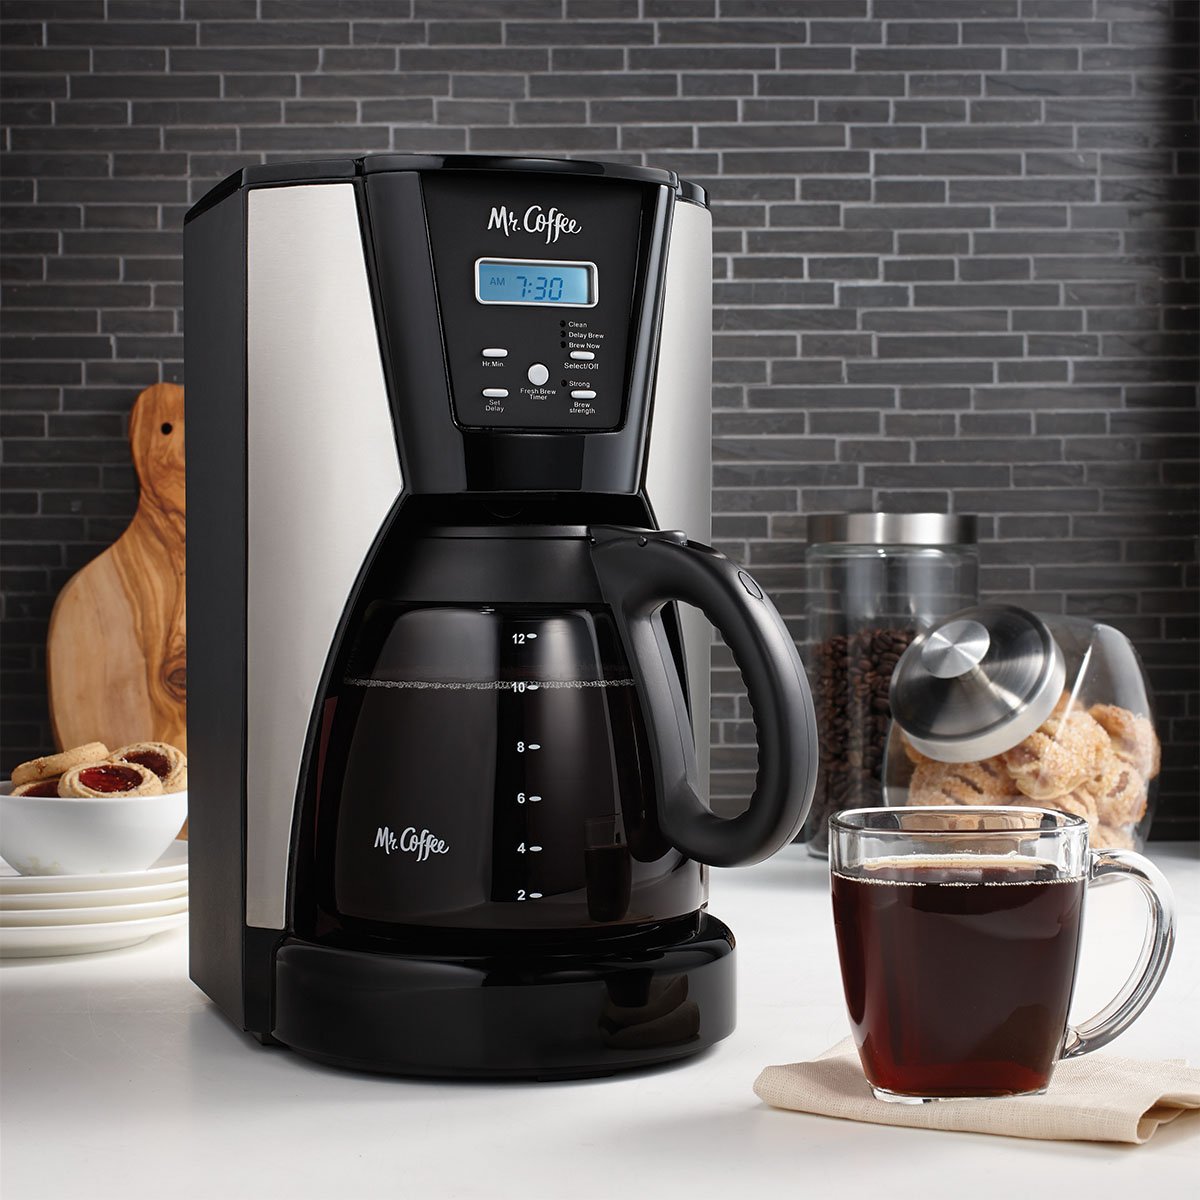 Mr. Coffee 5 Cup Programmable Black